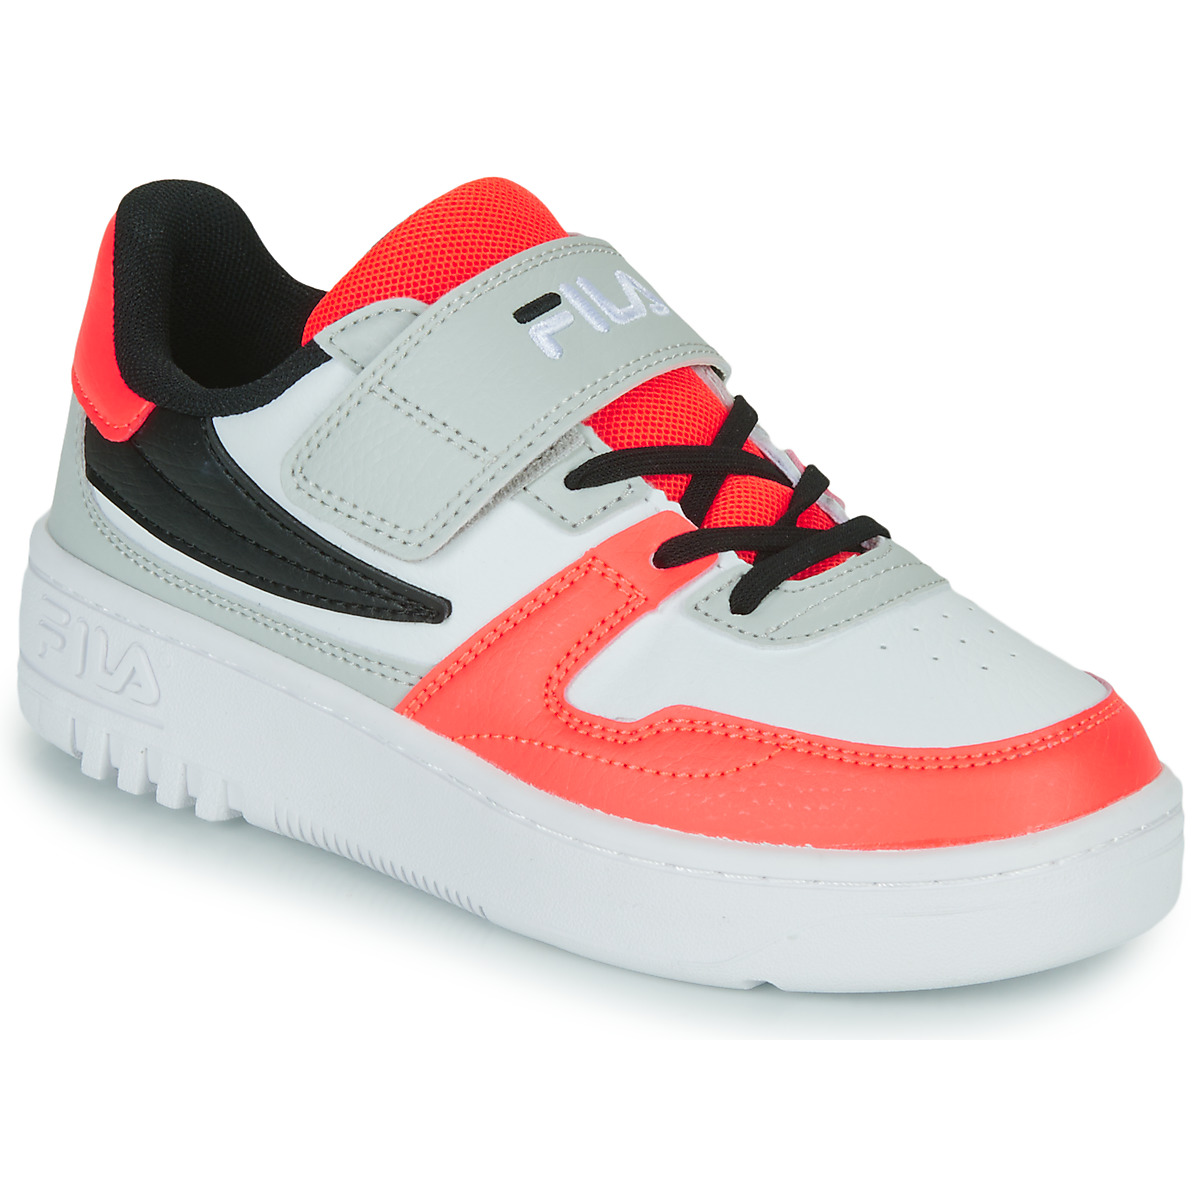 Fila FXVENTUNO velcro kids White Low / Free trainers | Shoes Grey / Red top - / Spartoo delivery ! NET Black - Child